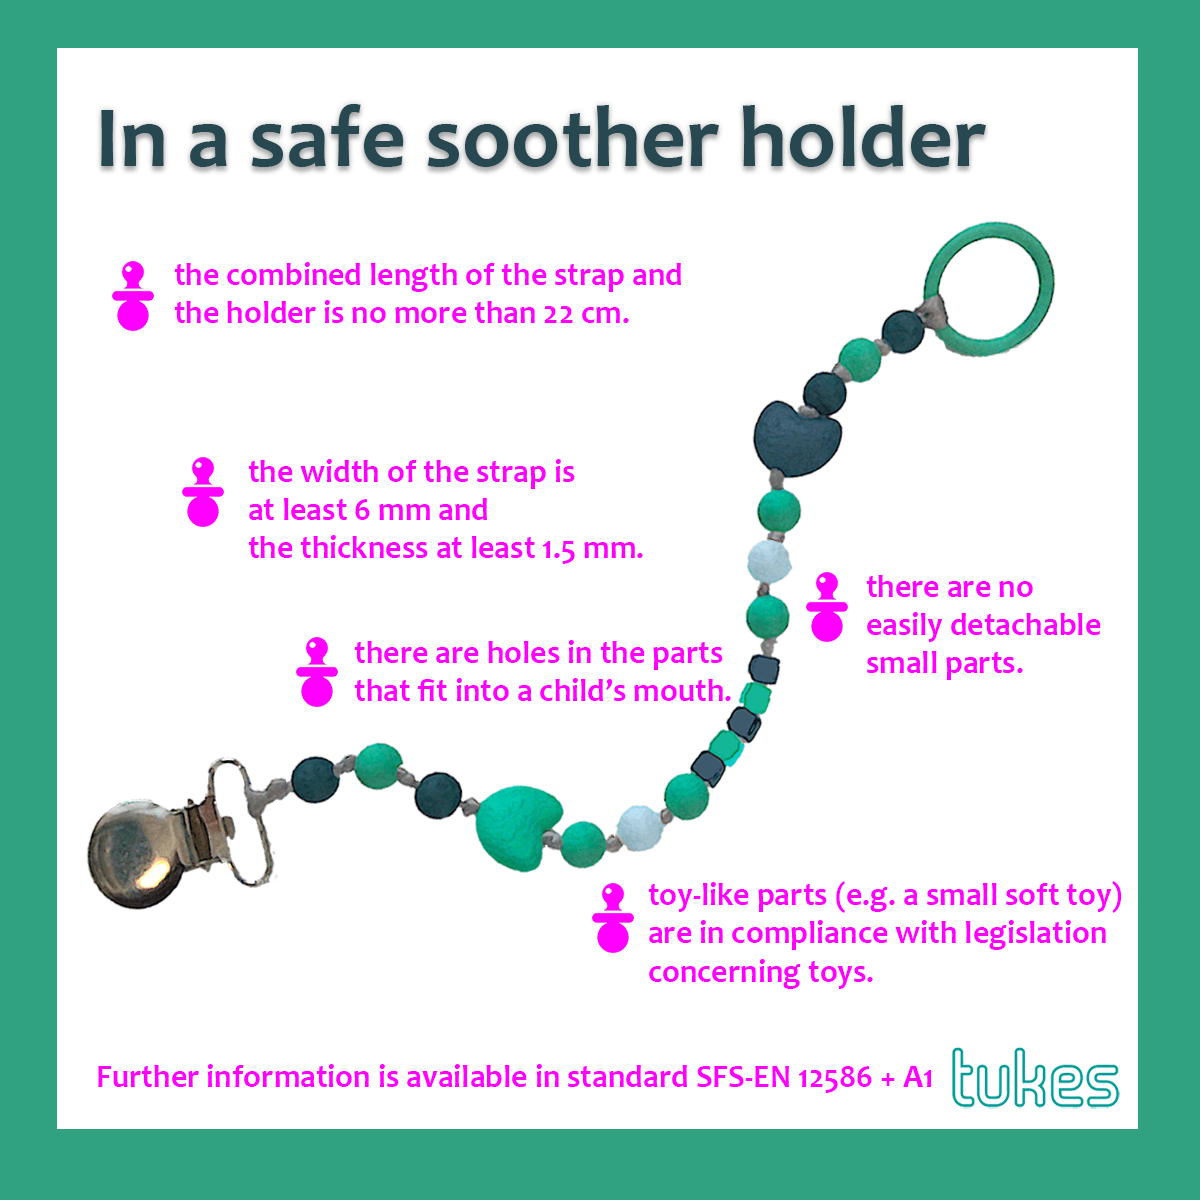 In a safe soother holder, the combined length of the strap and the holder is no more than 22 cm, the width of the strap is at least 6 mm and the thickness at least 1.5 mm, there are no easily detachable small parts, there are holes in the parts that fit into a child’s mouth, toy-like parts (e.g. a small soft toy) are in compliance with legislation concerning toys.